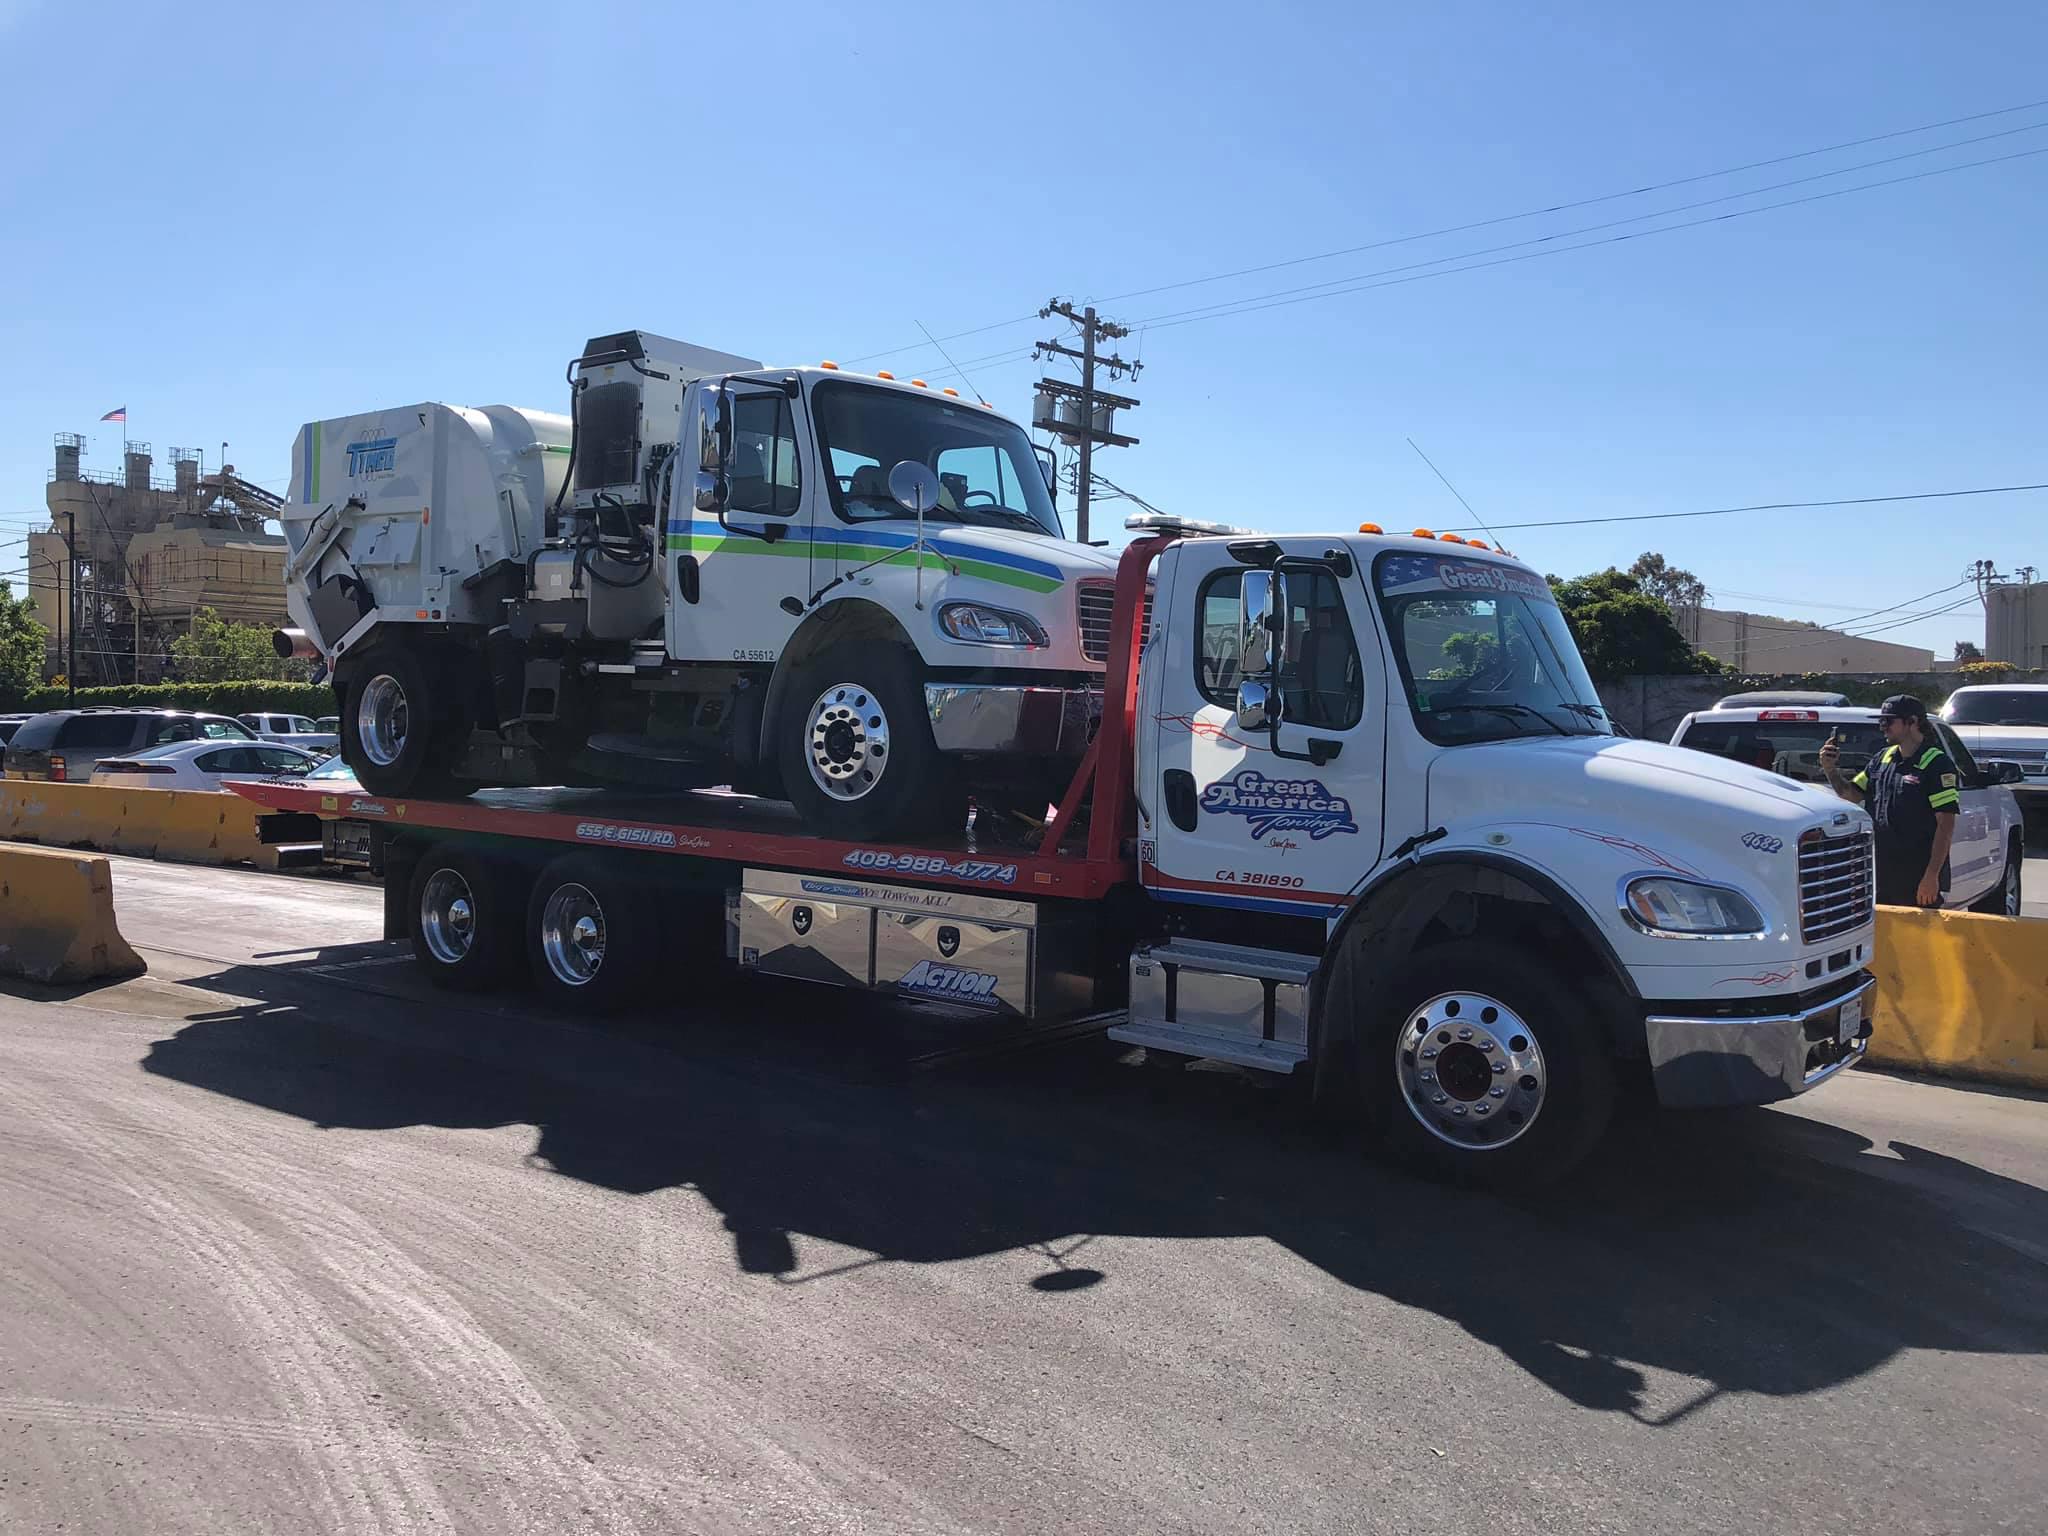 Break down? Call Action Towing now!